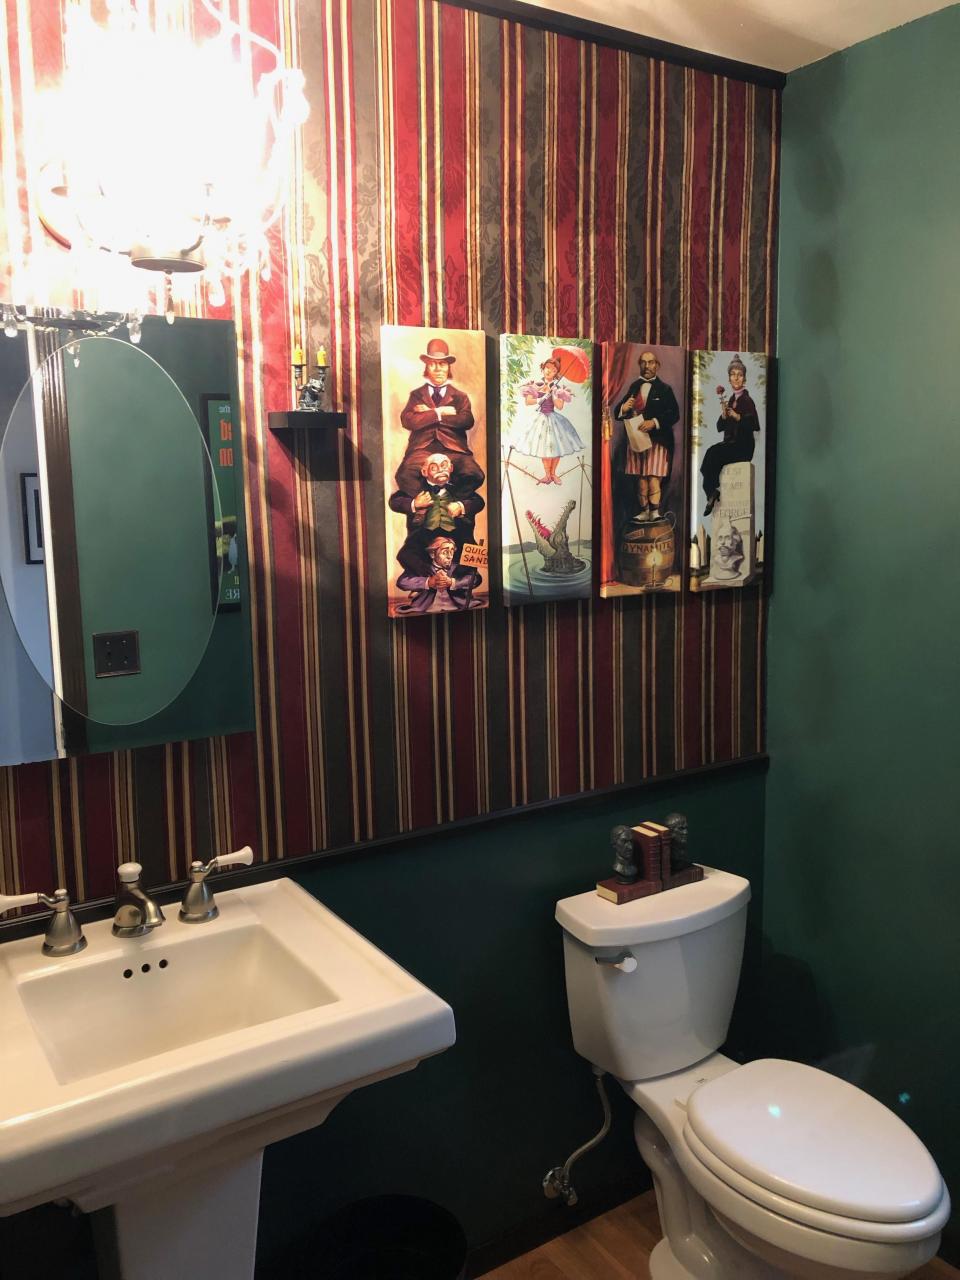 Because powder rooms are supposed to be fun and eclectic my new Haunted